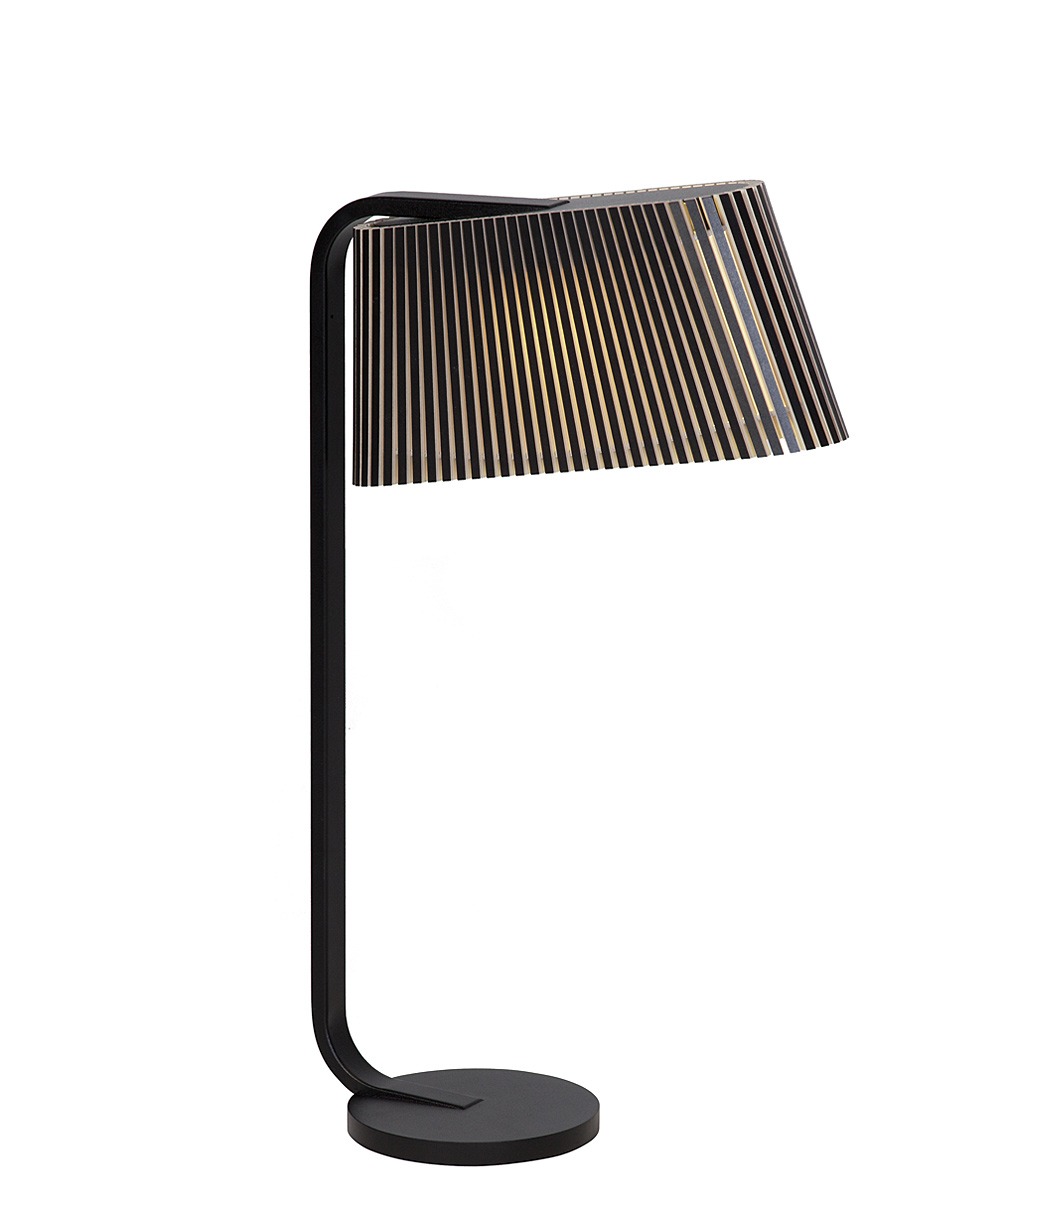 Owalo 7020 table lamp is available in black laminated